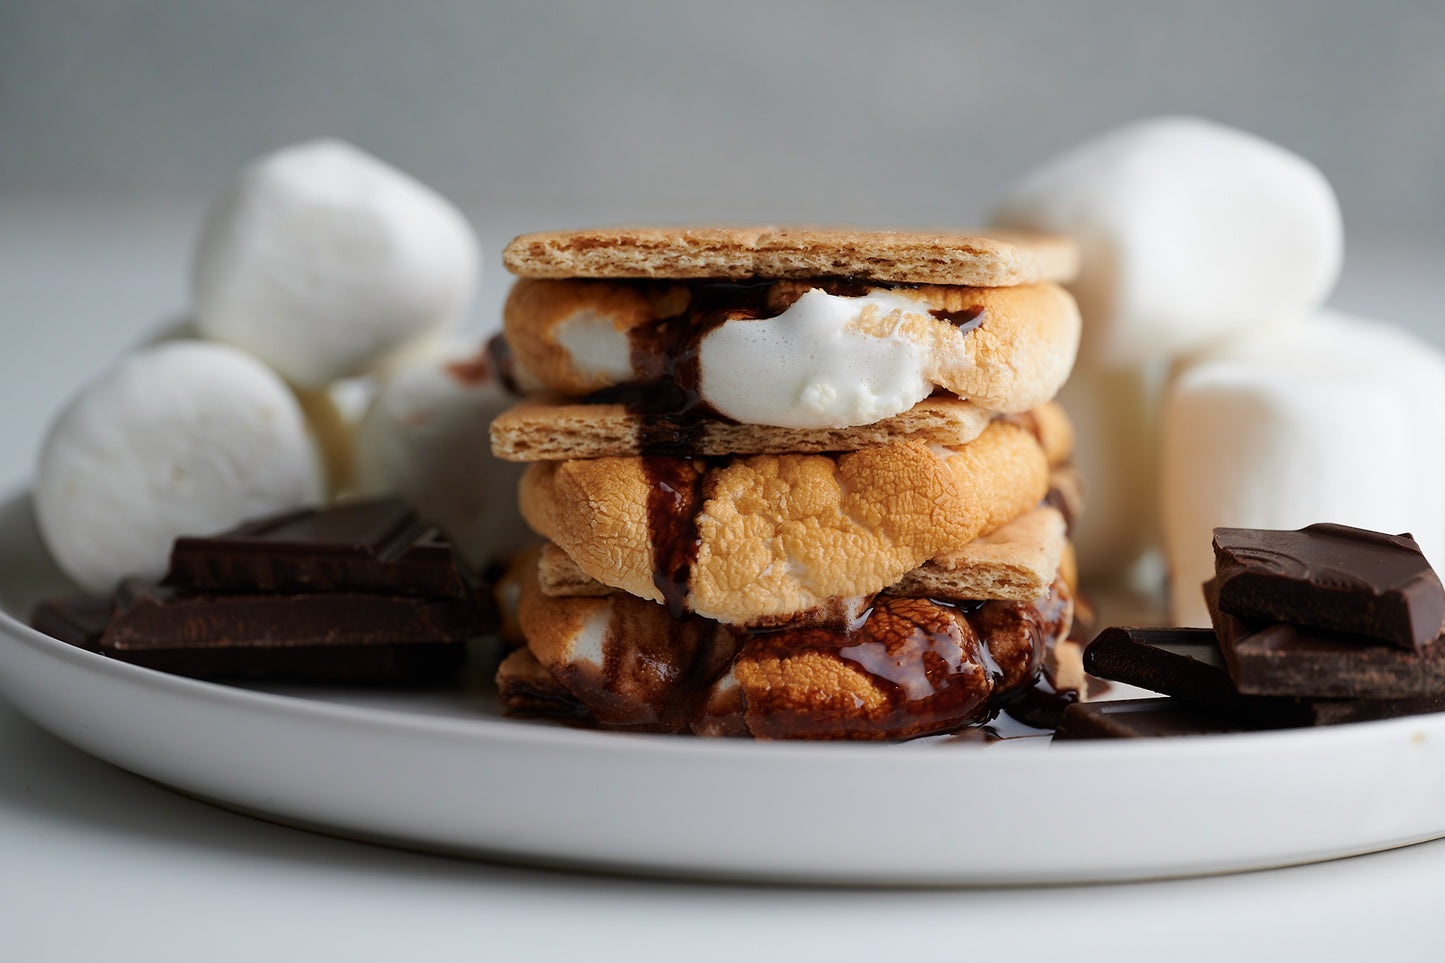 Smores on a plate indoors